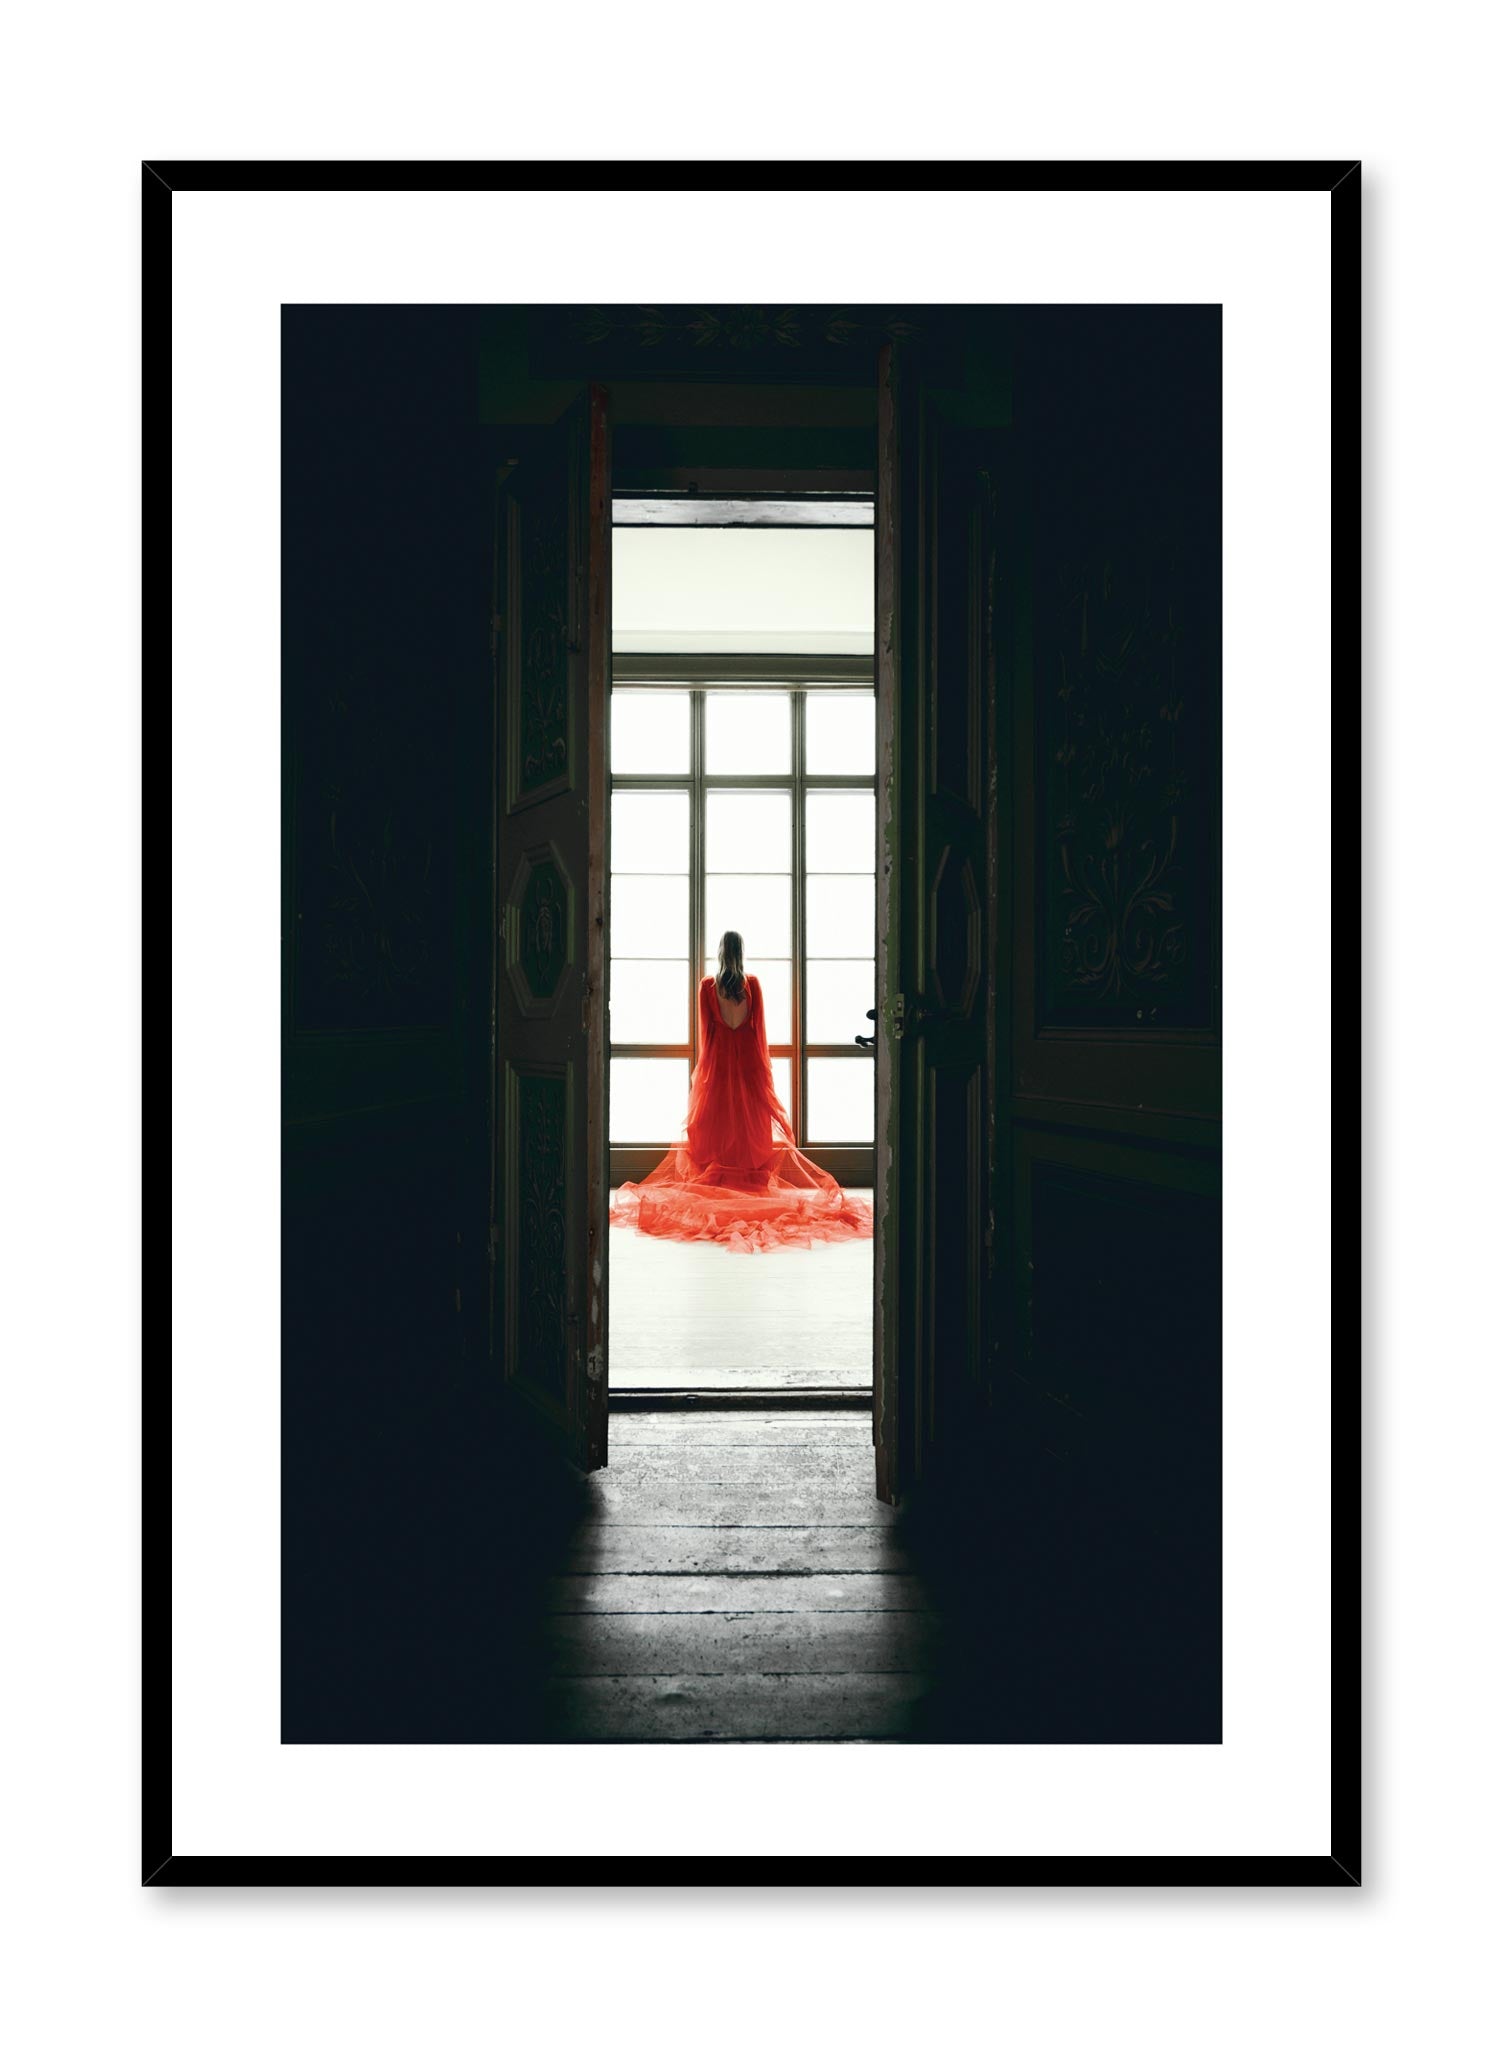 Minimalist design photography poster of Seductress lady in red by Love Warriors Creative Studio - Buy at Opposite Wall